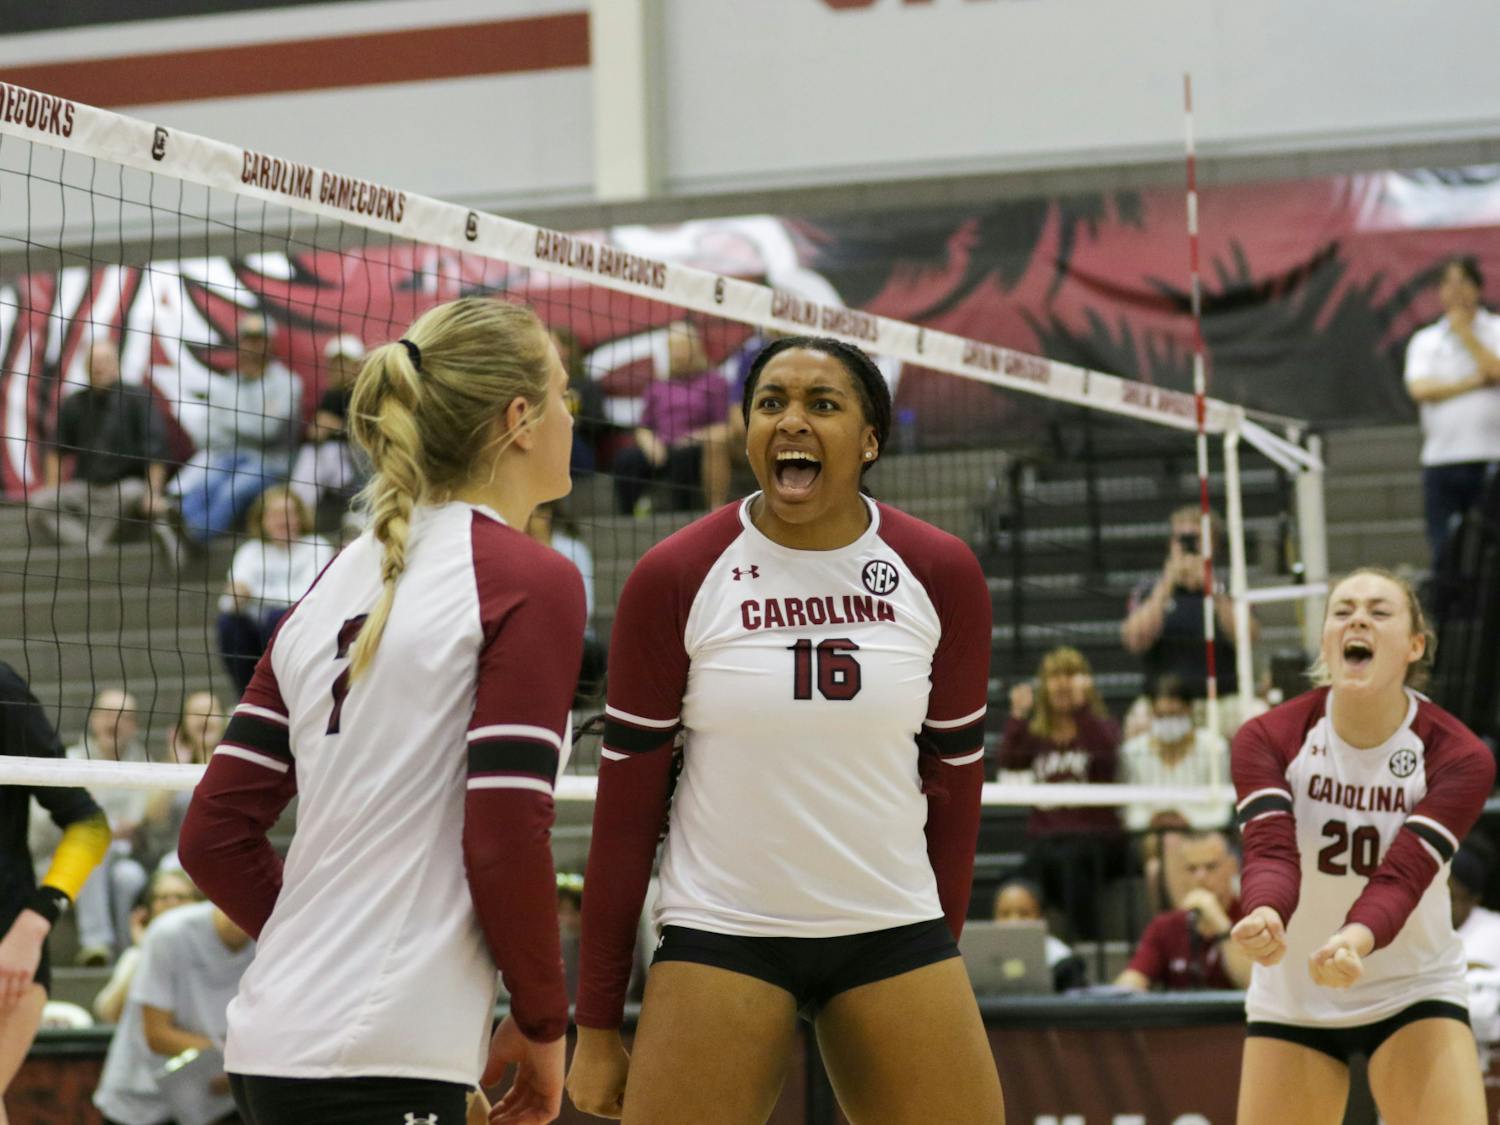 Sophomore middle Oby Anadi celebrating a point with her teammates at South Carolina’s game against Mizzou on Oct. 1, 2022. Strong defensive play earned the South Carolina volleyball team two victories over conference opponent Missouri this weekend.&nbsp;